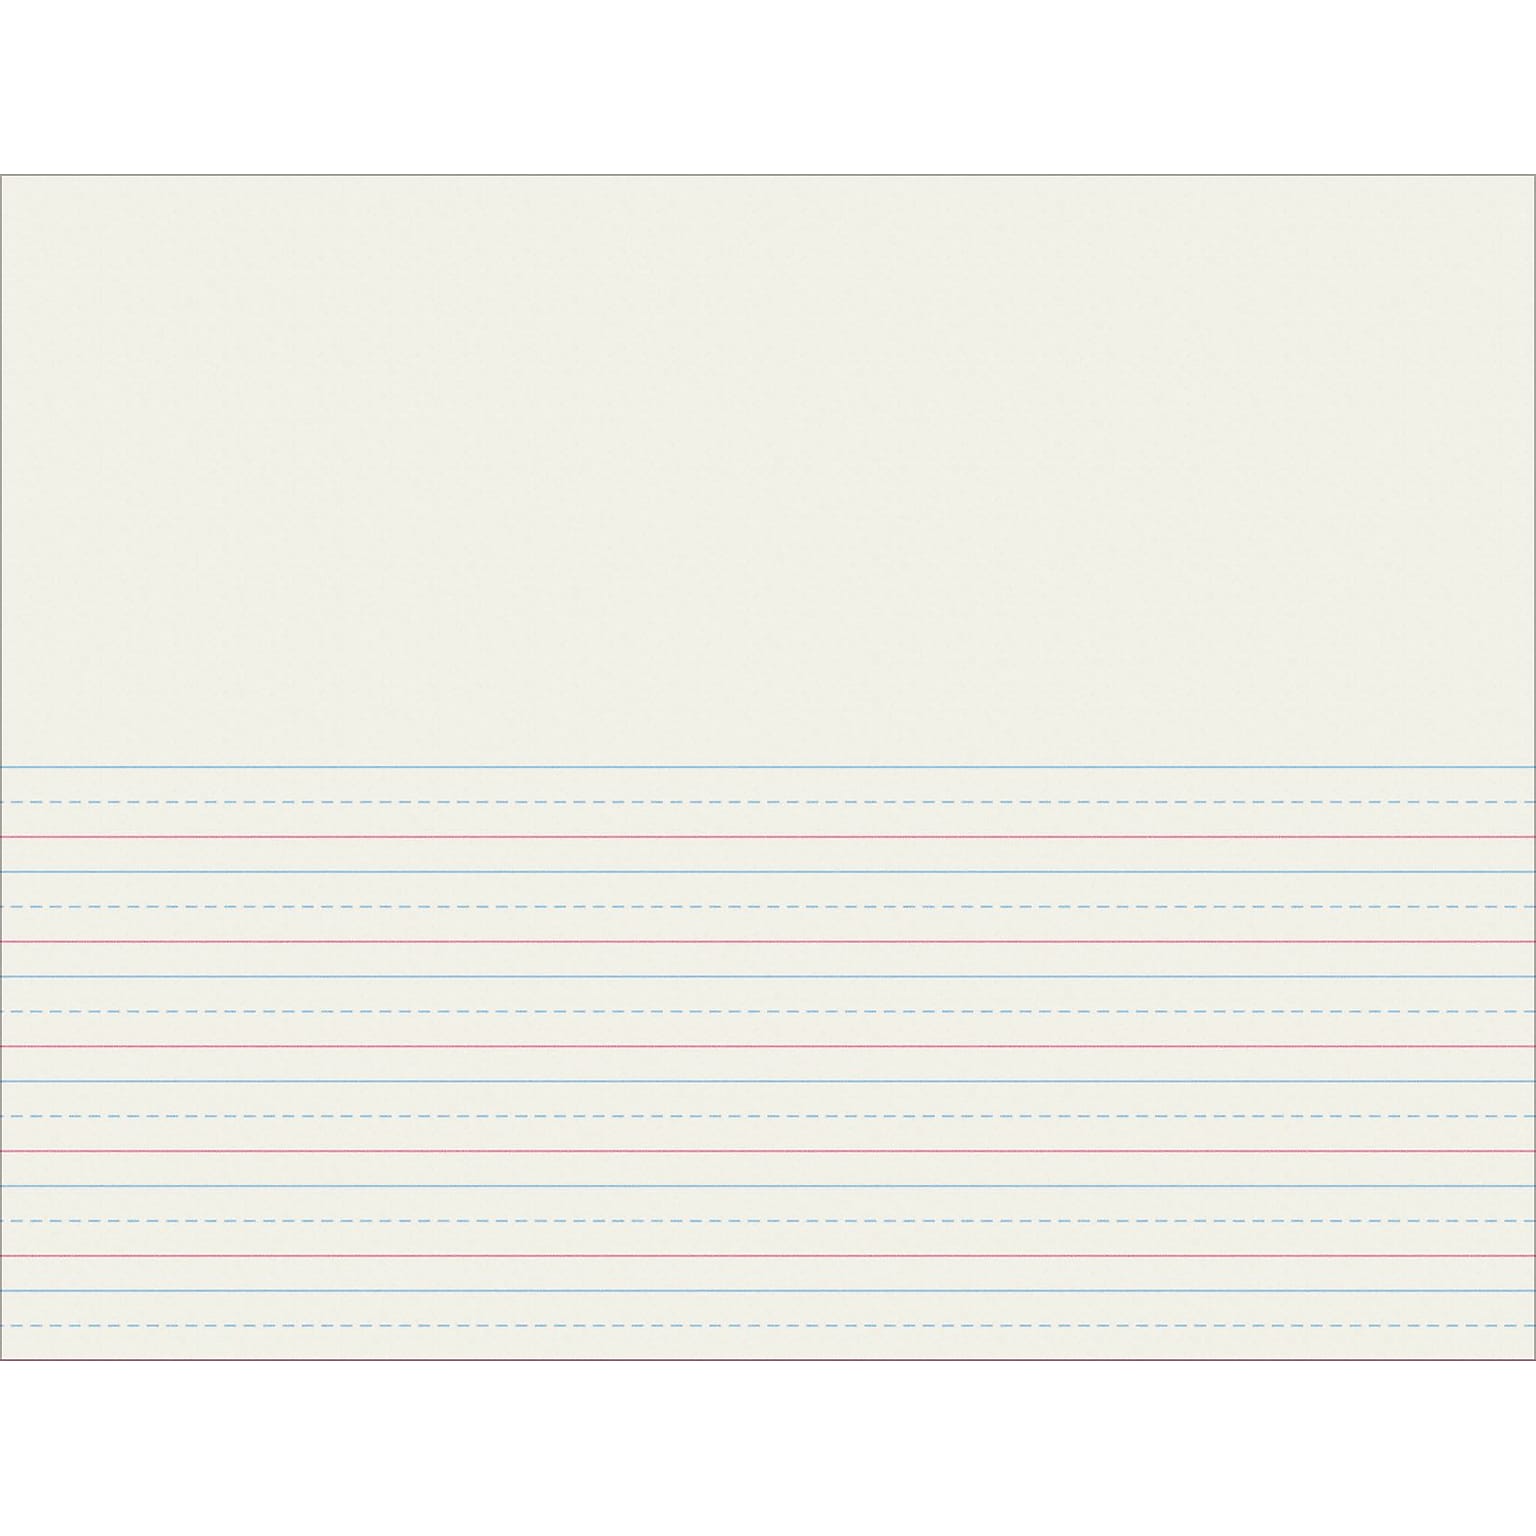 Pacon Storybook Paper for DNealian Programs 8-1/2 x 11, 1/2 Long Way Ruled, White, 500 Sheets/Pack (PAC2693)